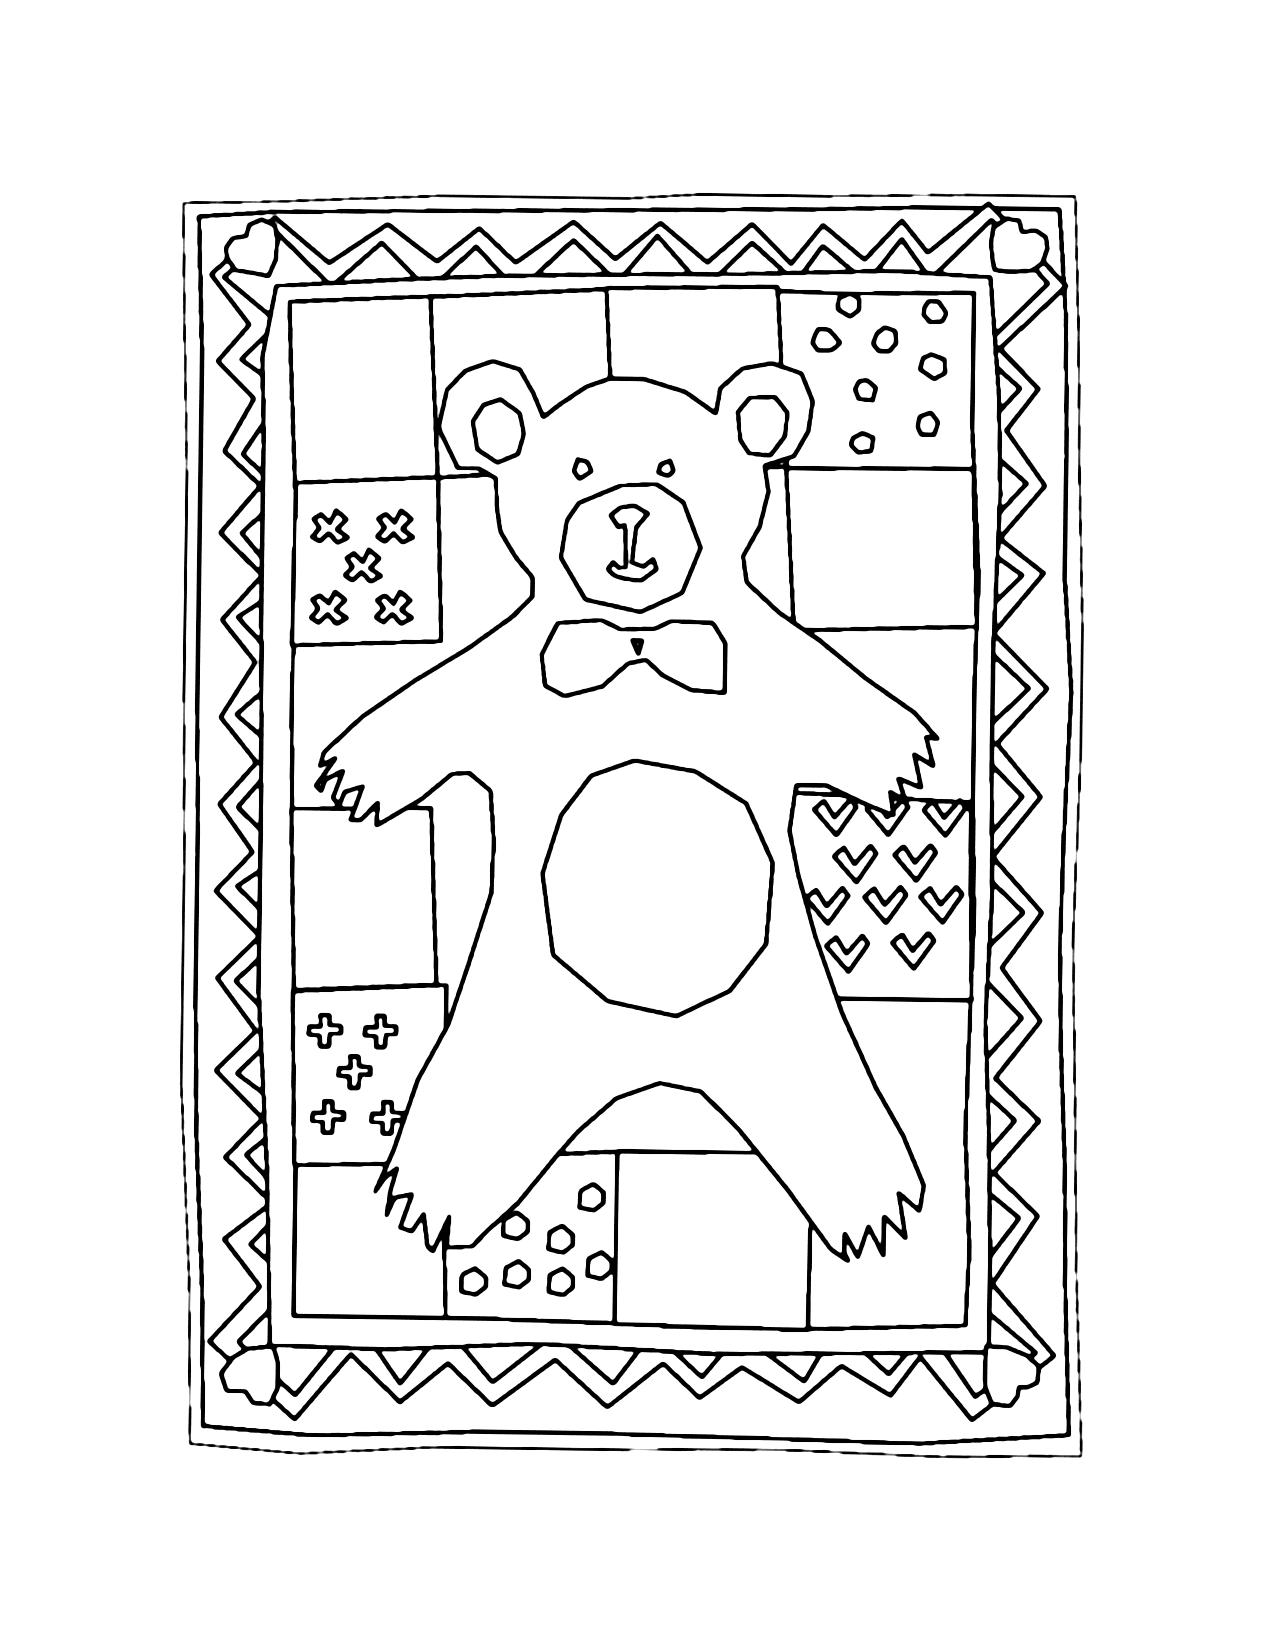 Teddy Bear Quilt Coloring Page